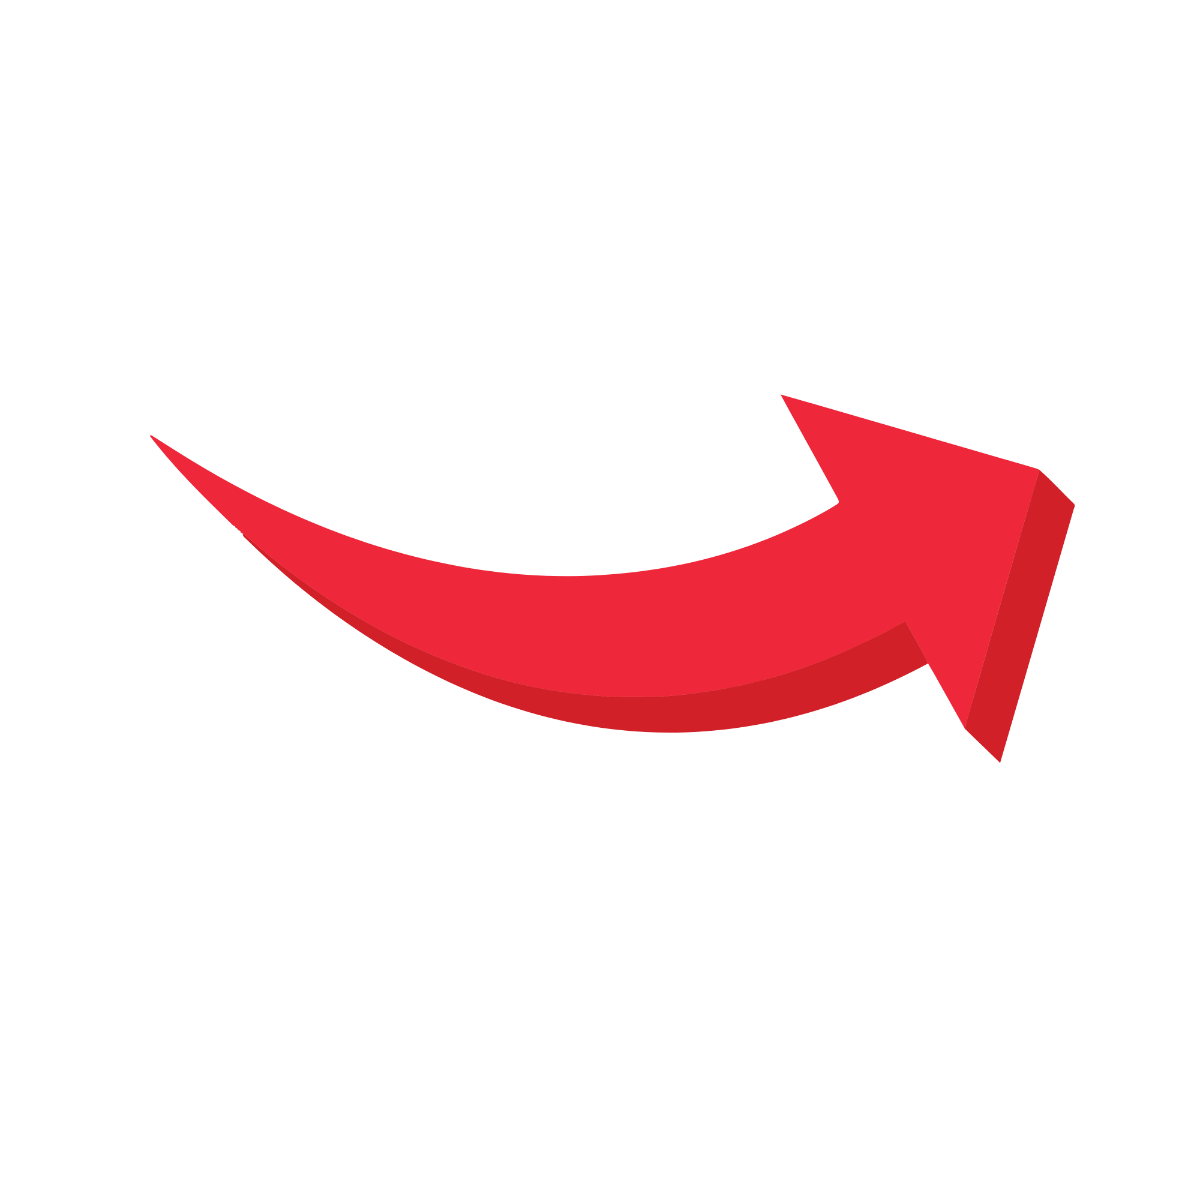 Curved Red Arrow Vector